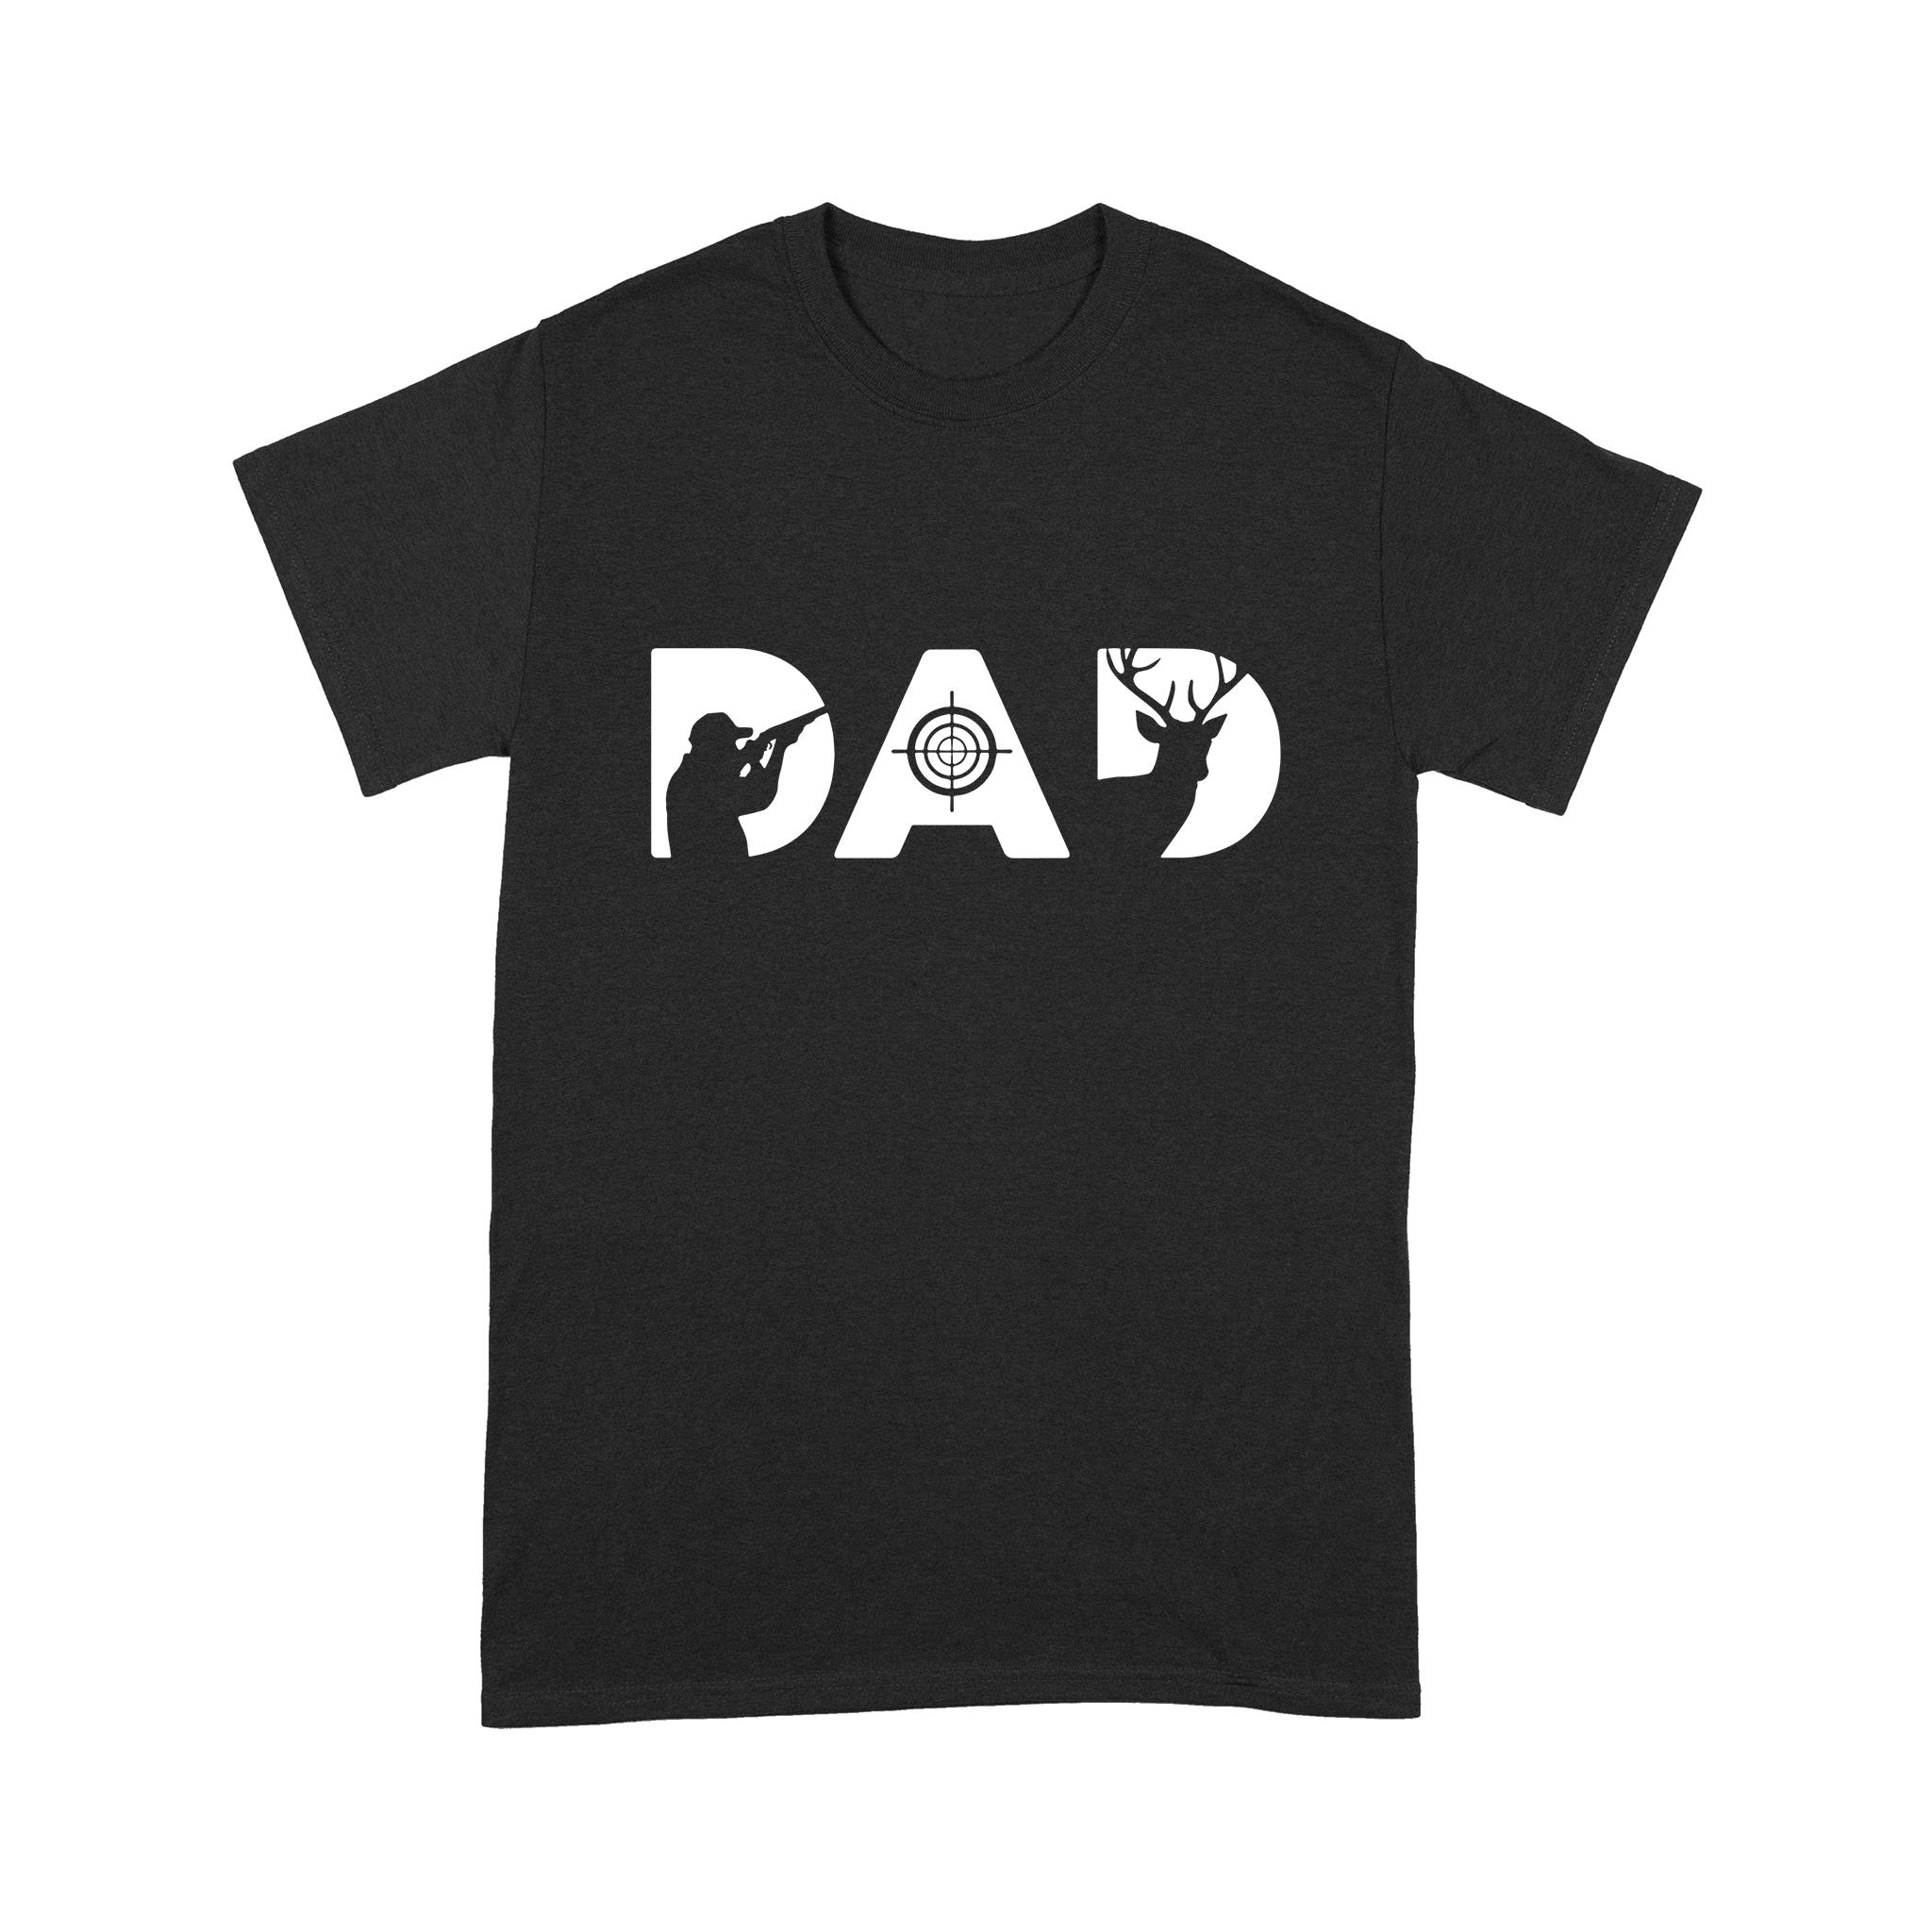 Hunting Shirt for Dad, Dad’s Hunting T-shirt, Fathers Day Gift for Hunting, birthday, father’s day gift for dad – NQS1287